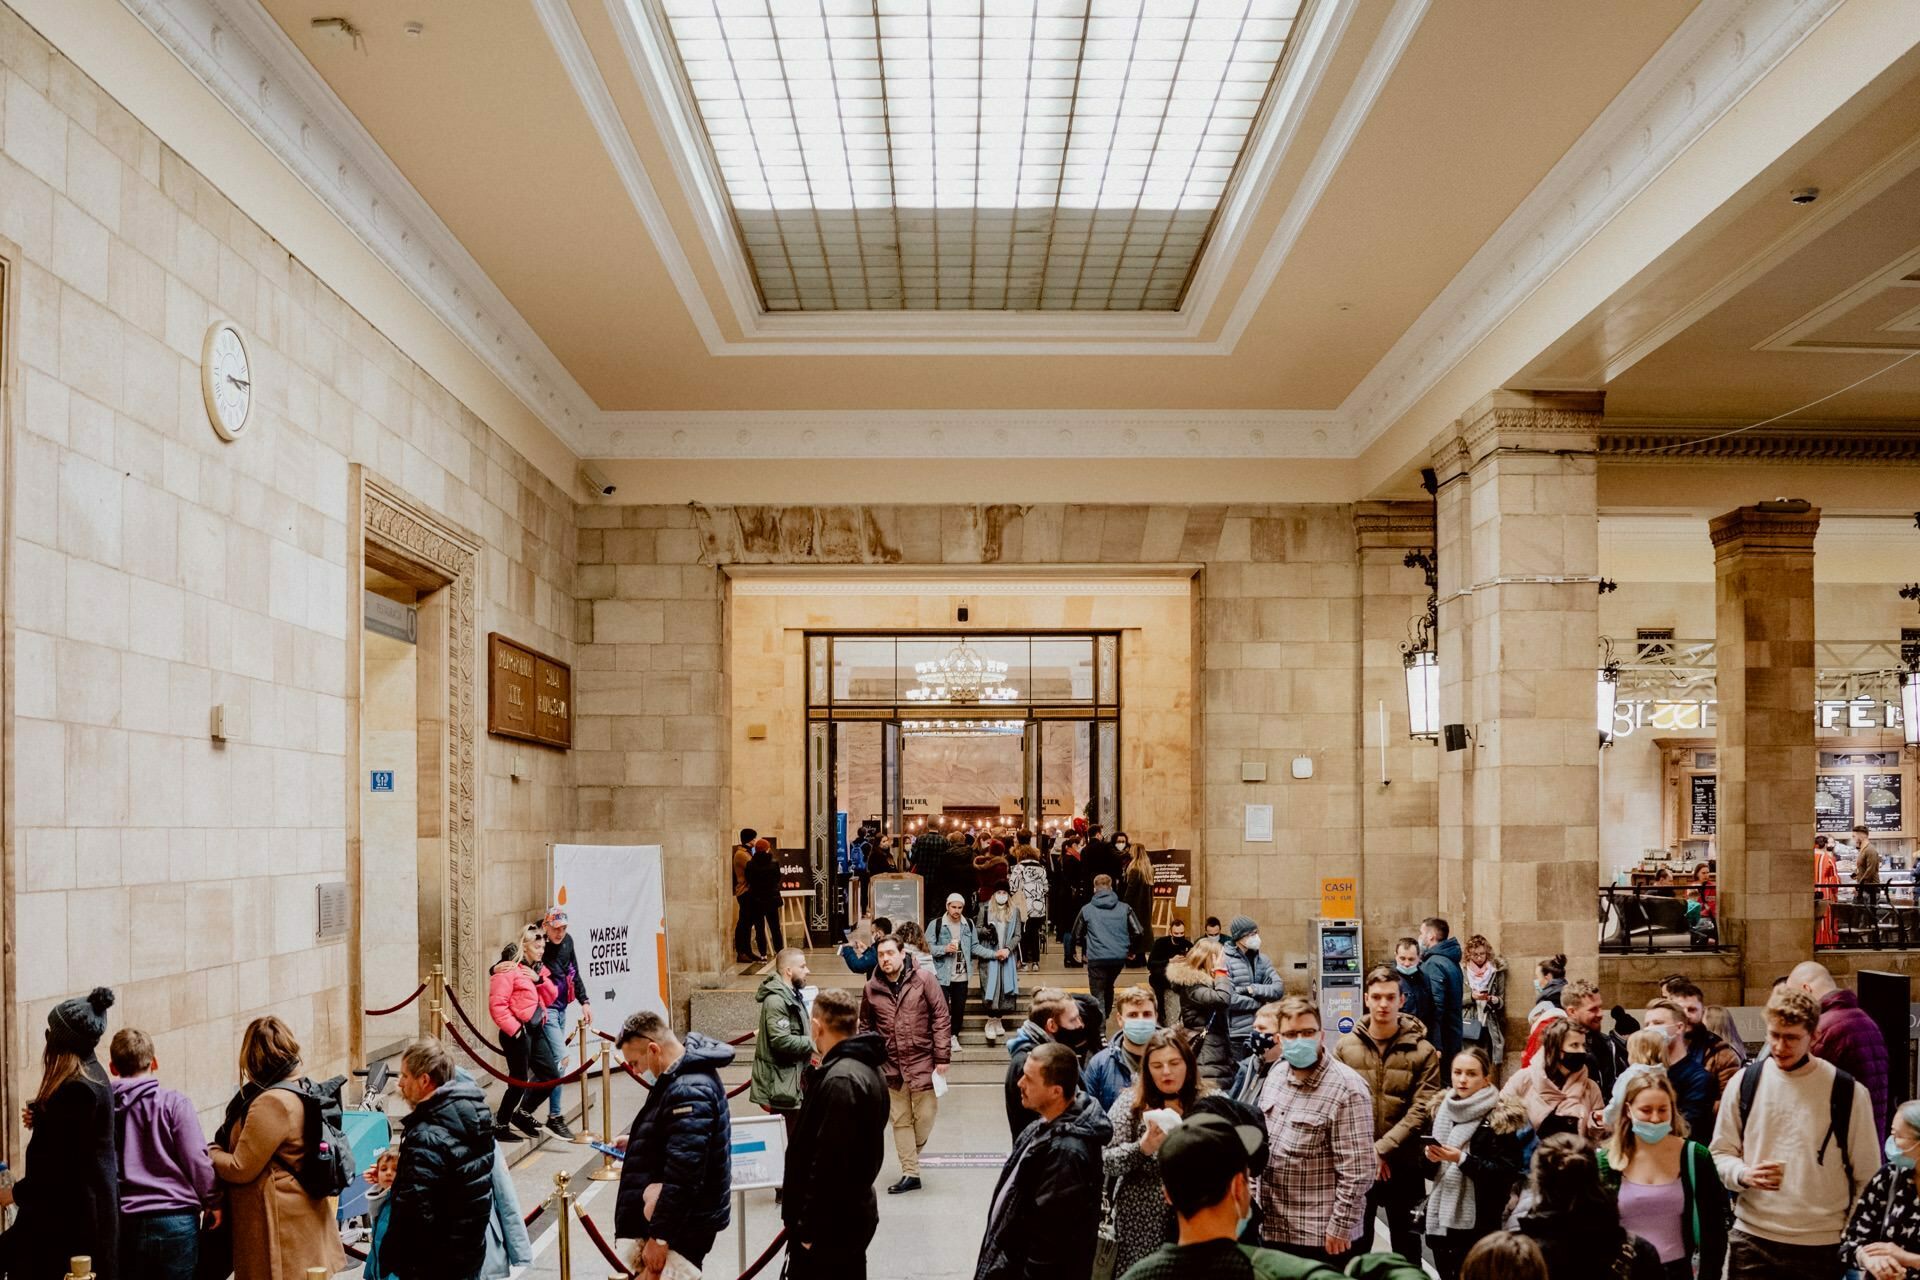 Warsaw Coffee Festival main entrance in the Palace of Culture and Science